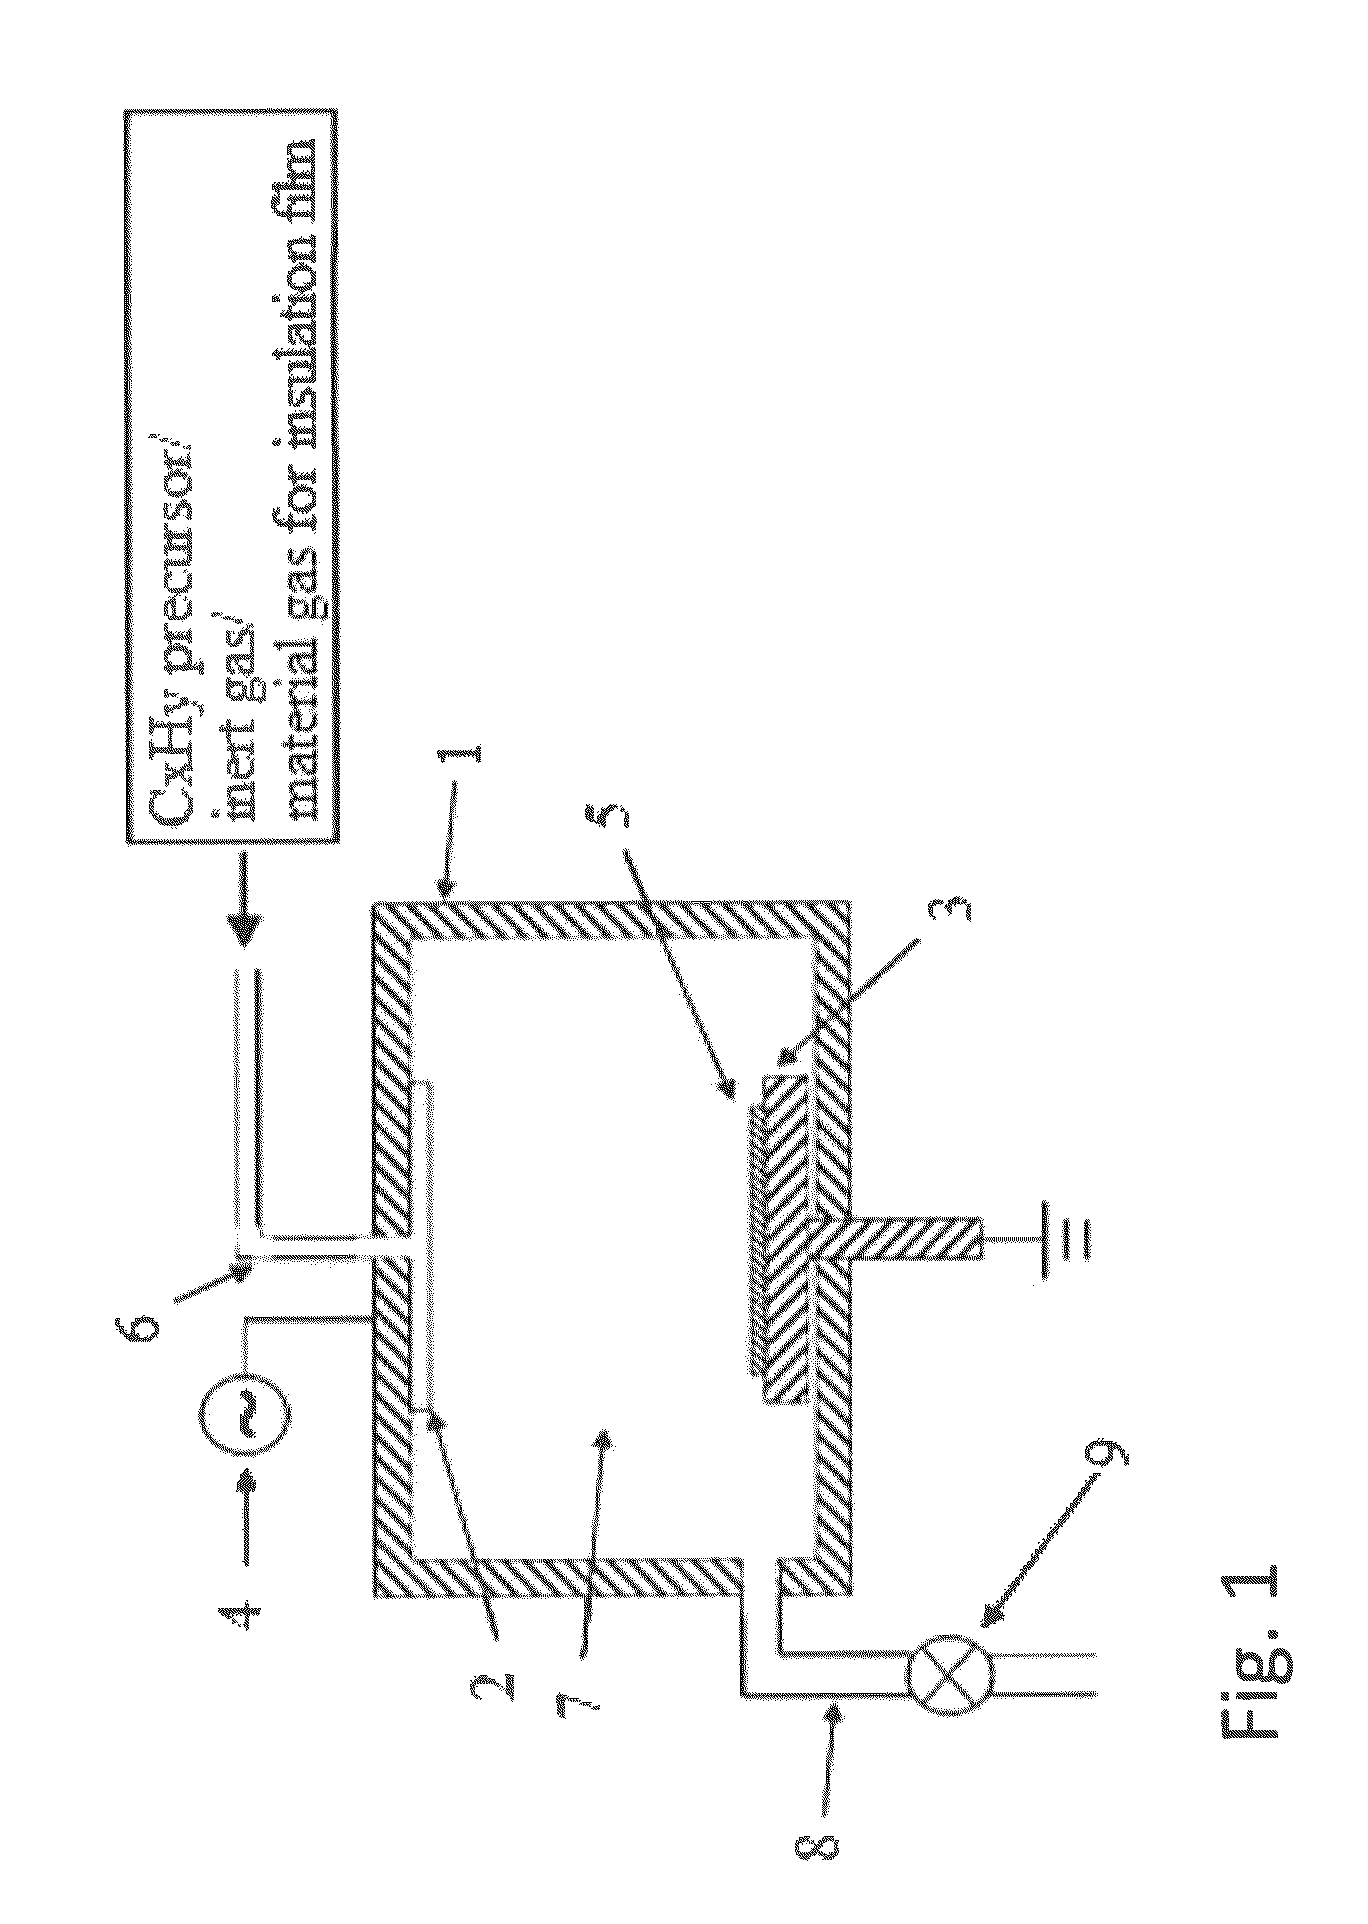 Method for filling recesses using pre-treatment with hydrocarbon-containing gas